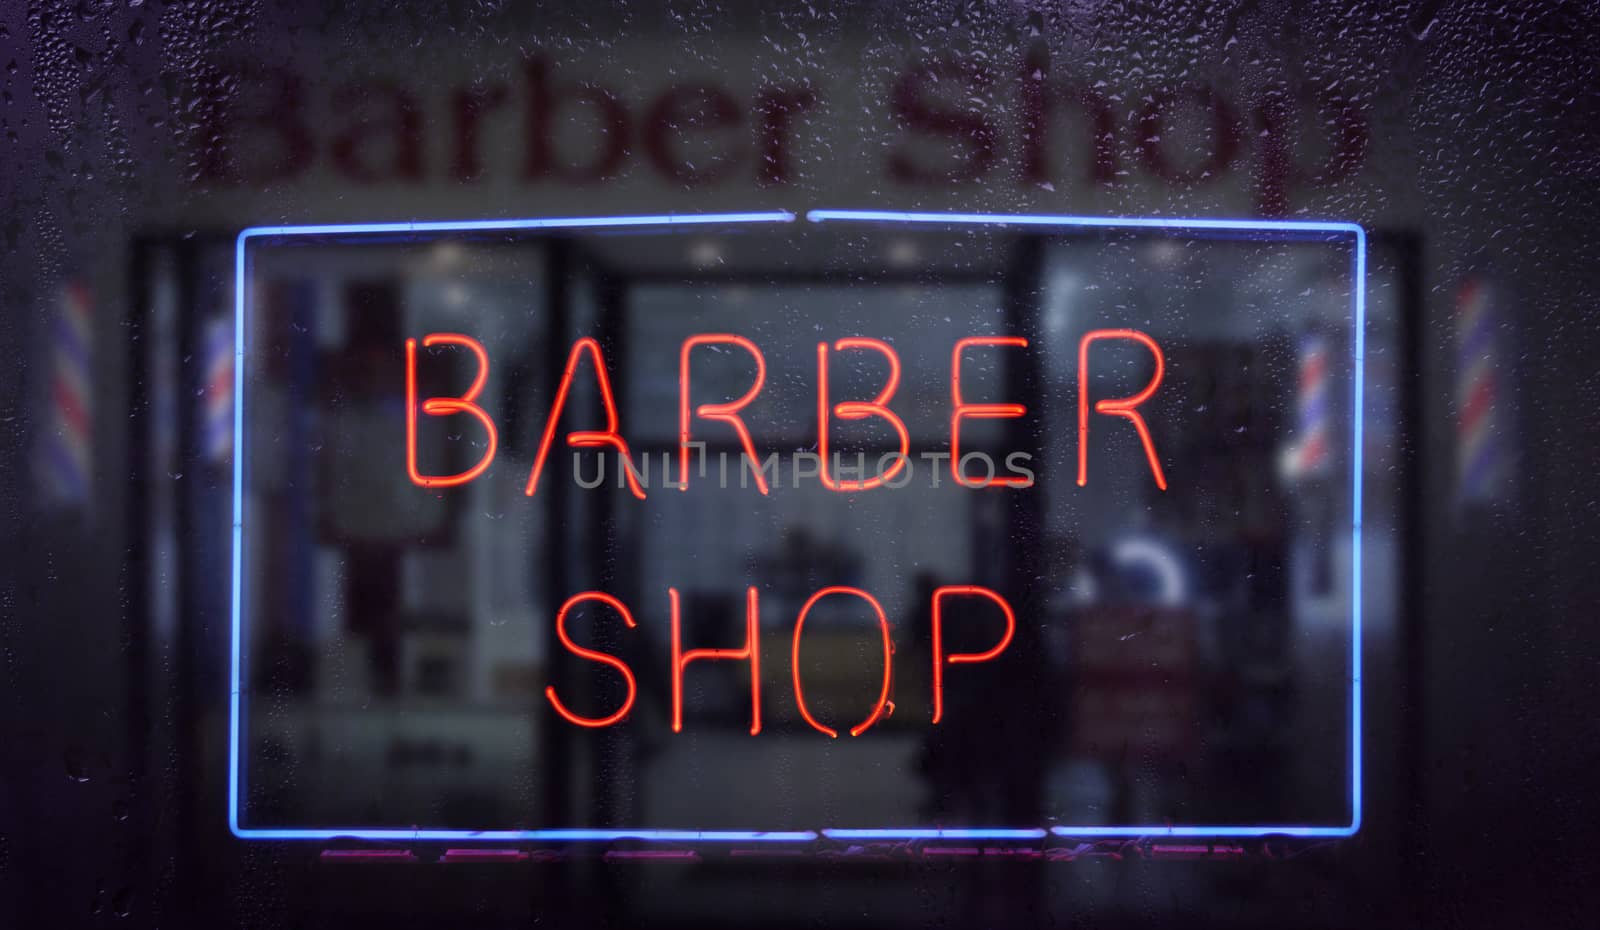 Barber Shop Neon Sign by Marti157900